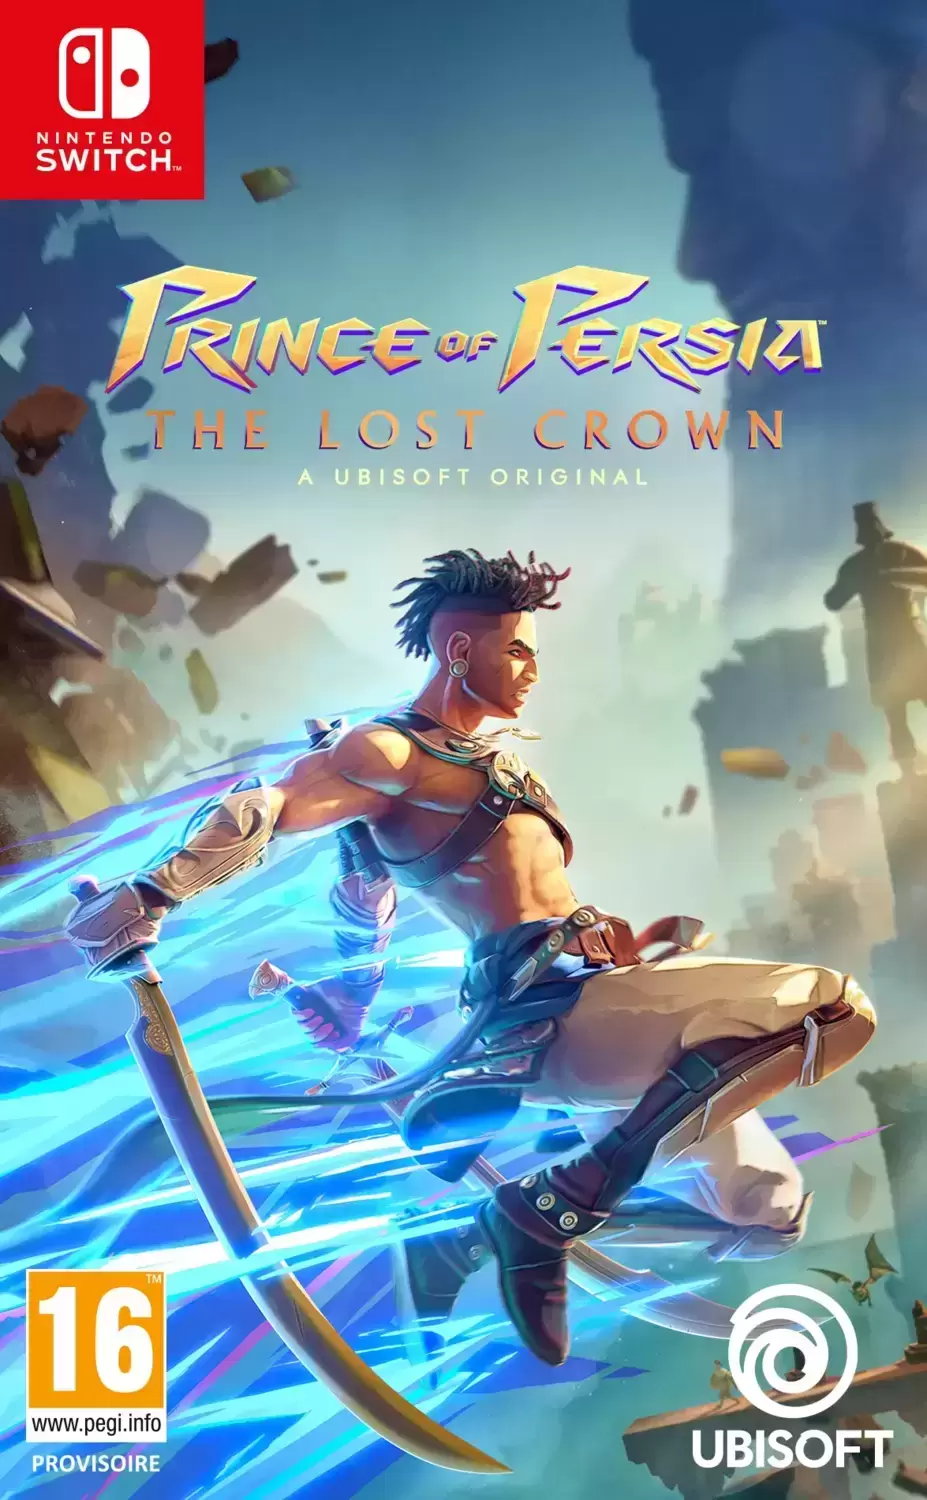 Nintendo Switch Games - Prince Of Persia : The Lost Crown